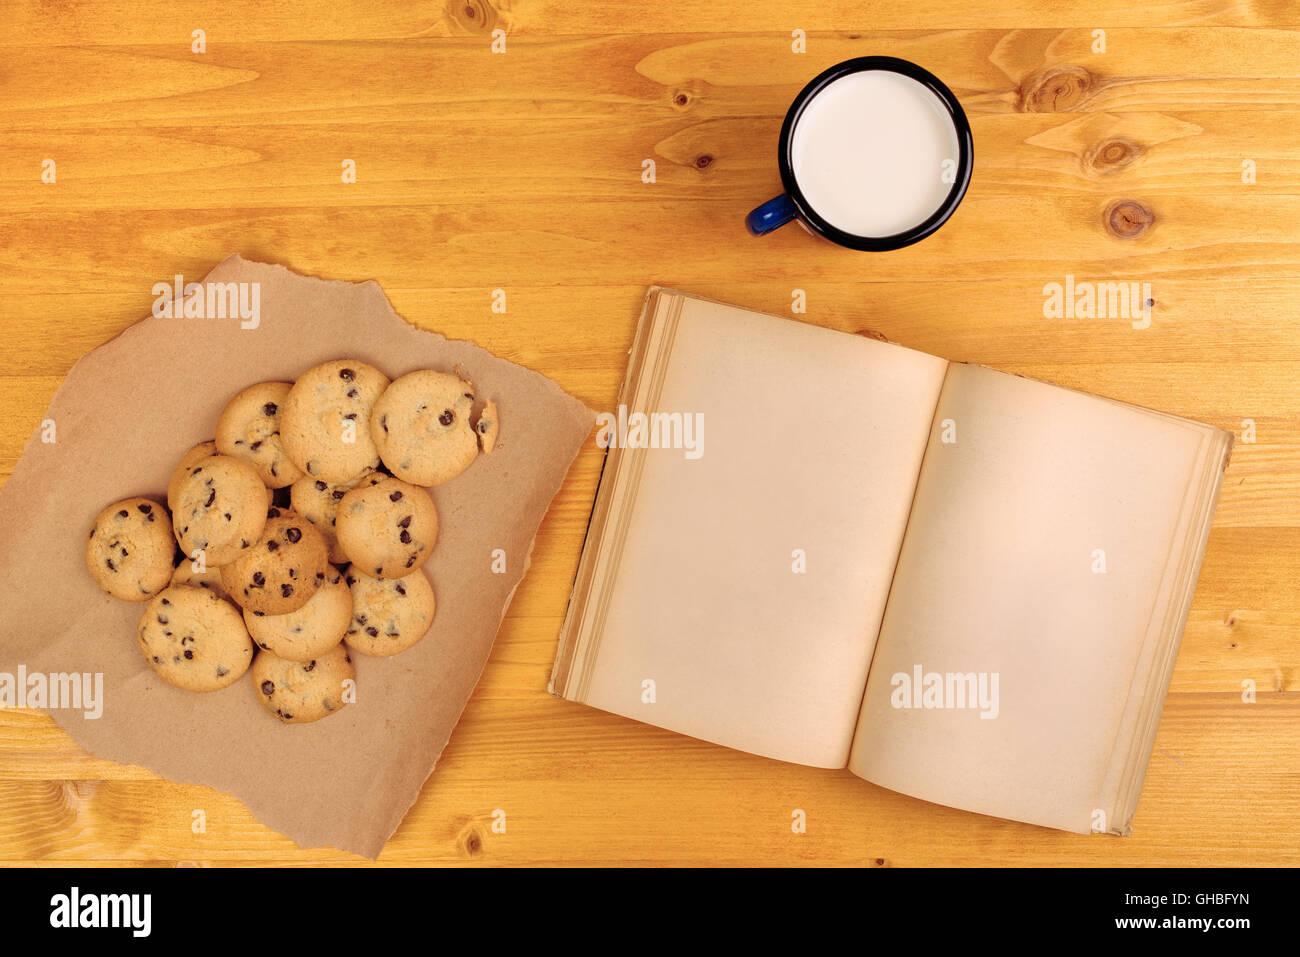 Homemade chocolate chip cookies, milk cup and open book on rustic wooden table, top view Stock Photo